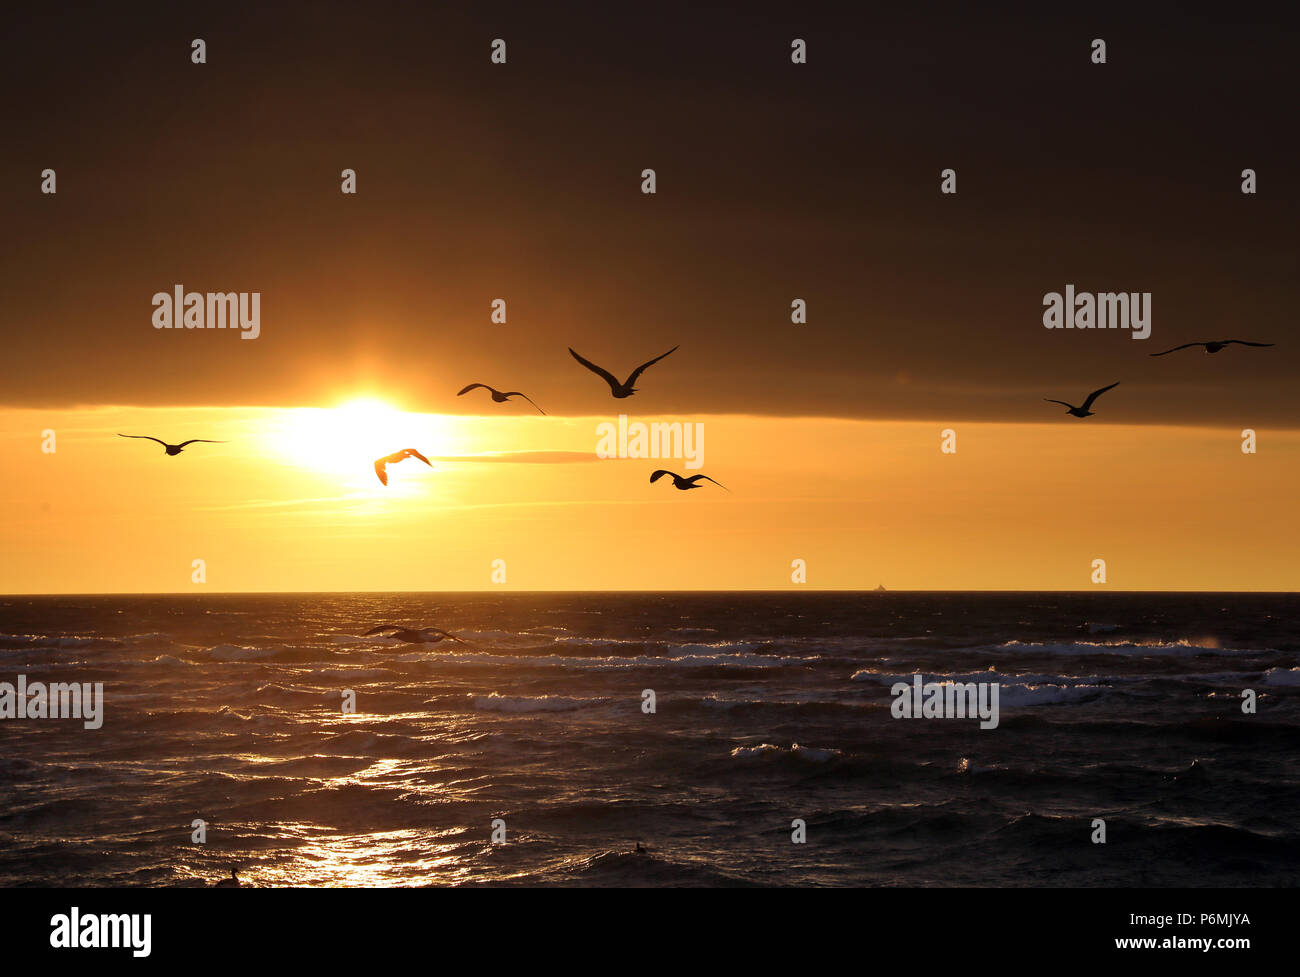 Warnemuende, sunset at the Baltic Sea Stock Photo